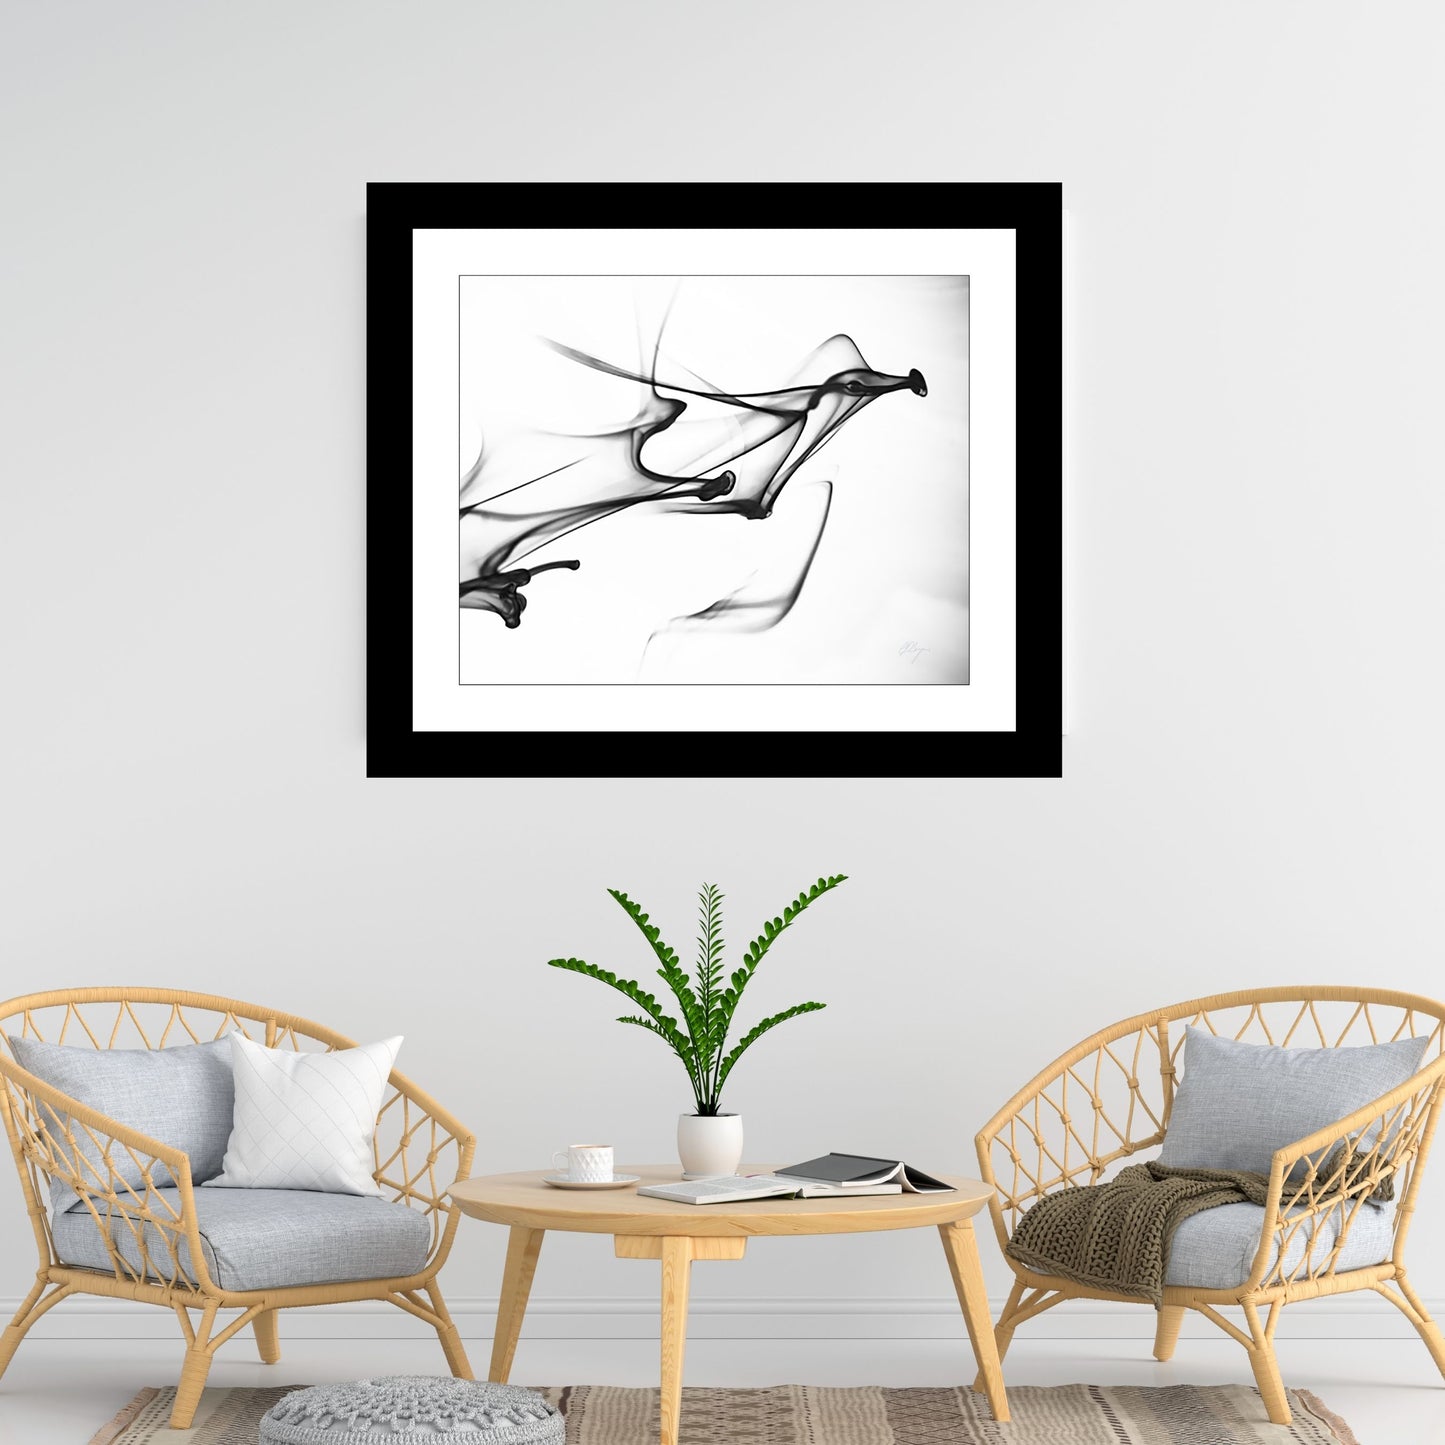 abstract bird in flight photograph with white mat and black frame hung on a white wall with two rattan chairs and light wood table placed beneath